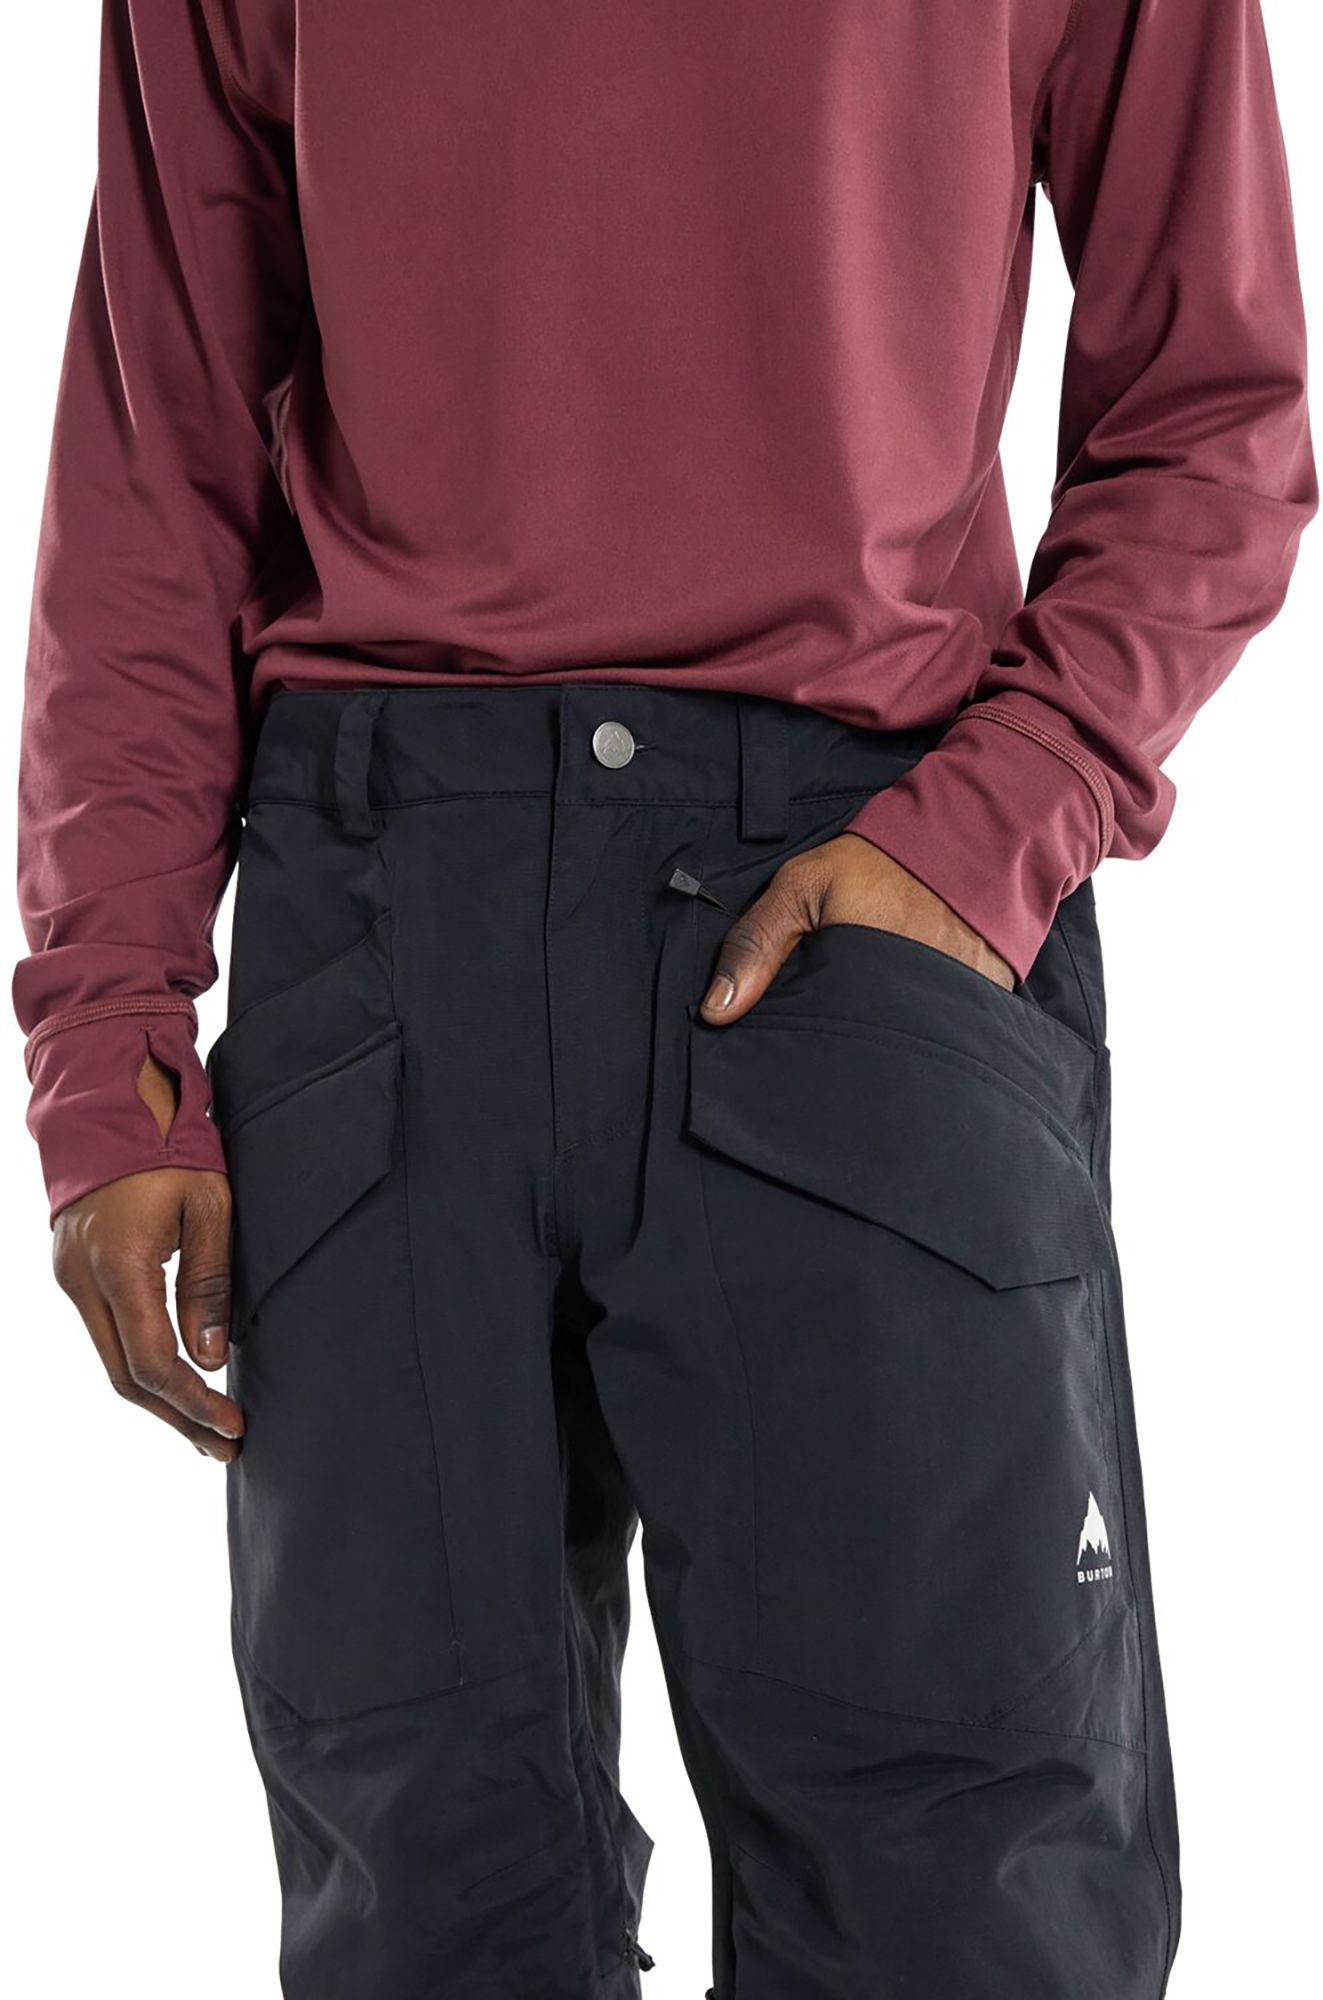 Cold Weather Pants  DICK's Sporting Goods